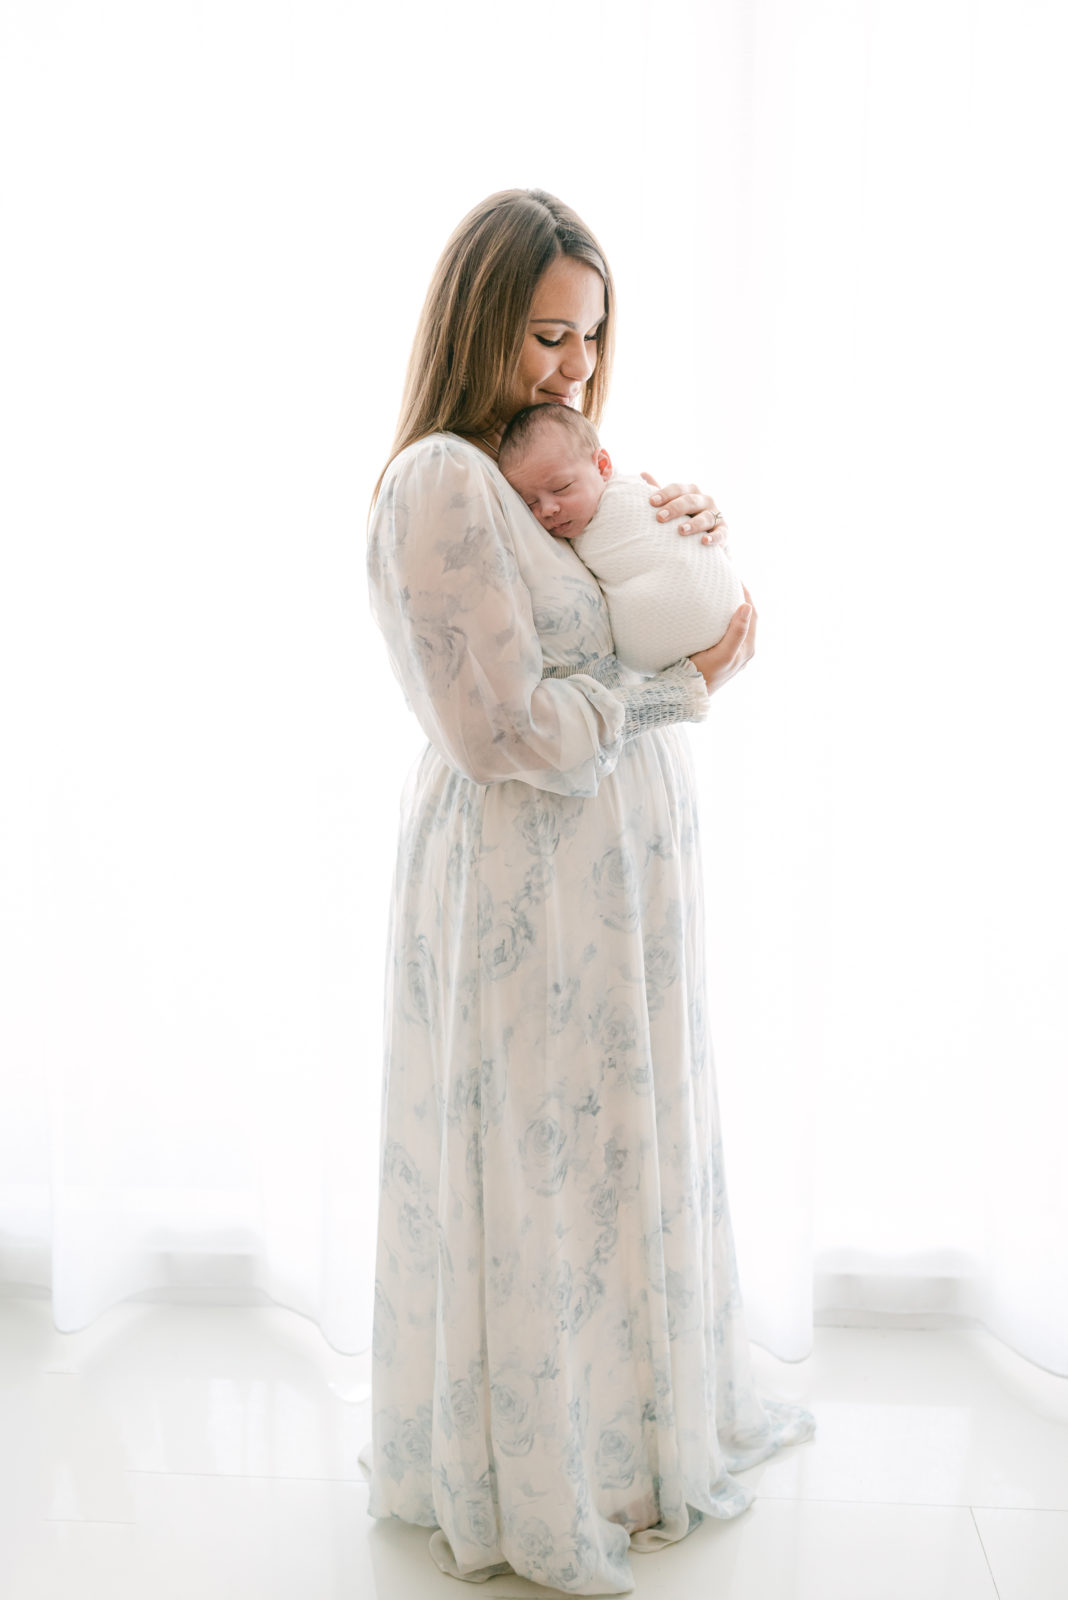 Backlit Miami mom holding her newborn for her lifestyle photoshoot